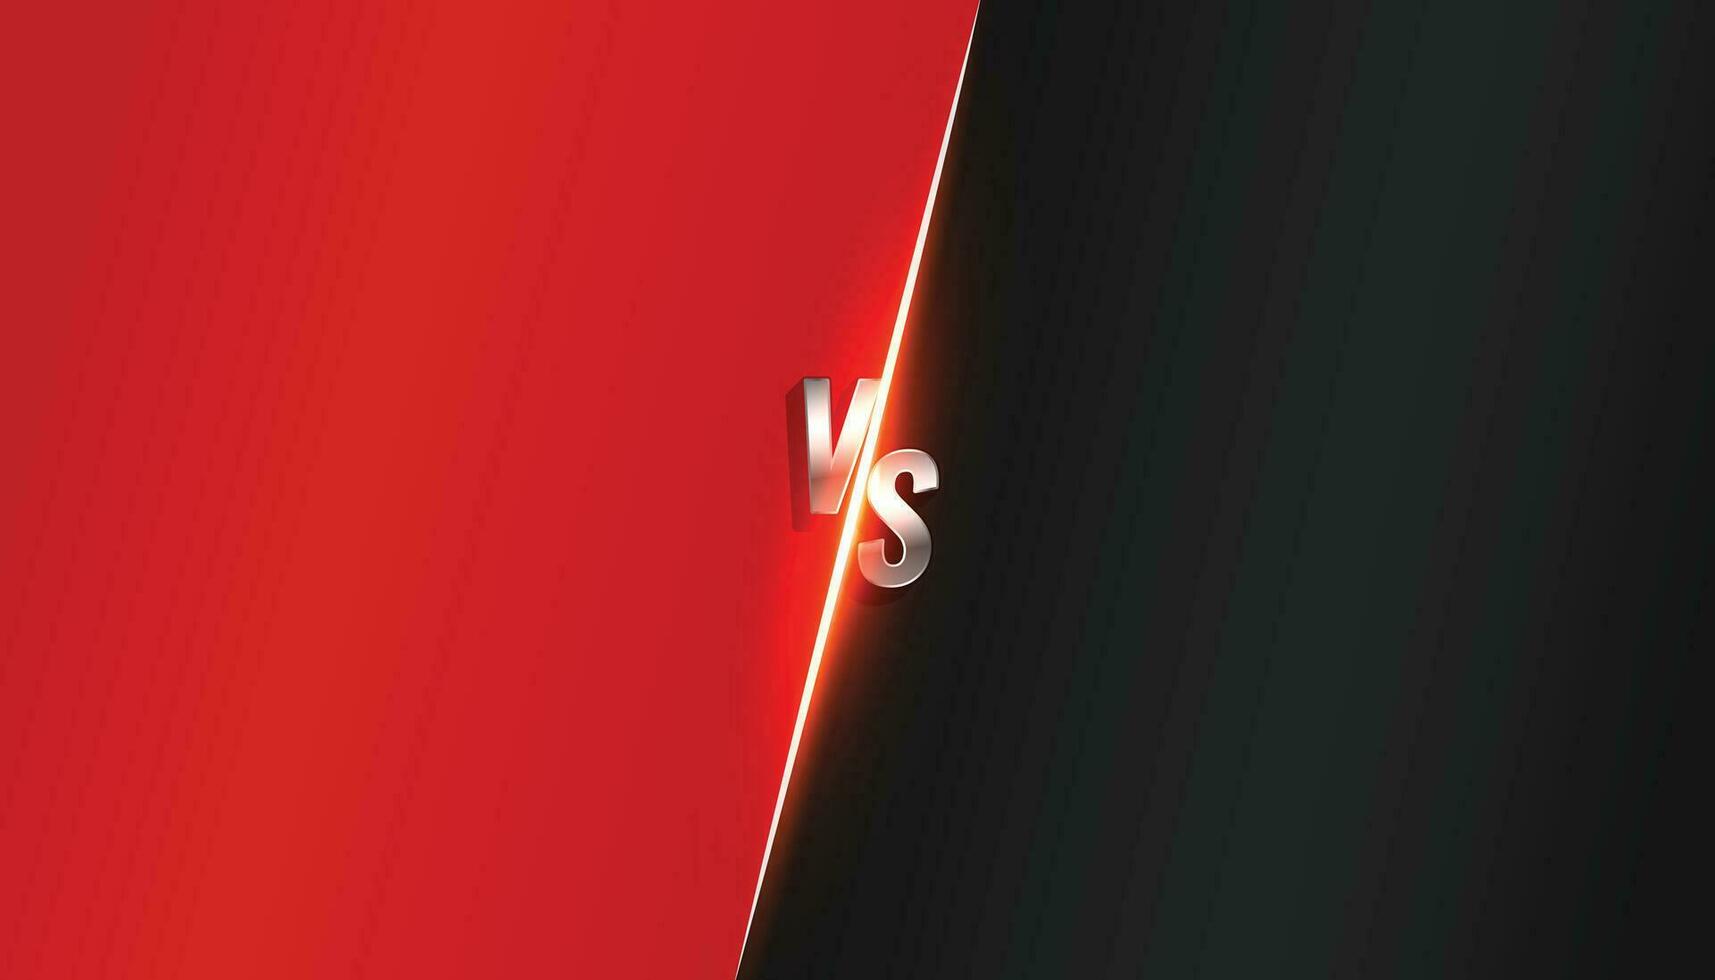 versus vs background in red and black color vector